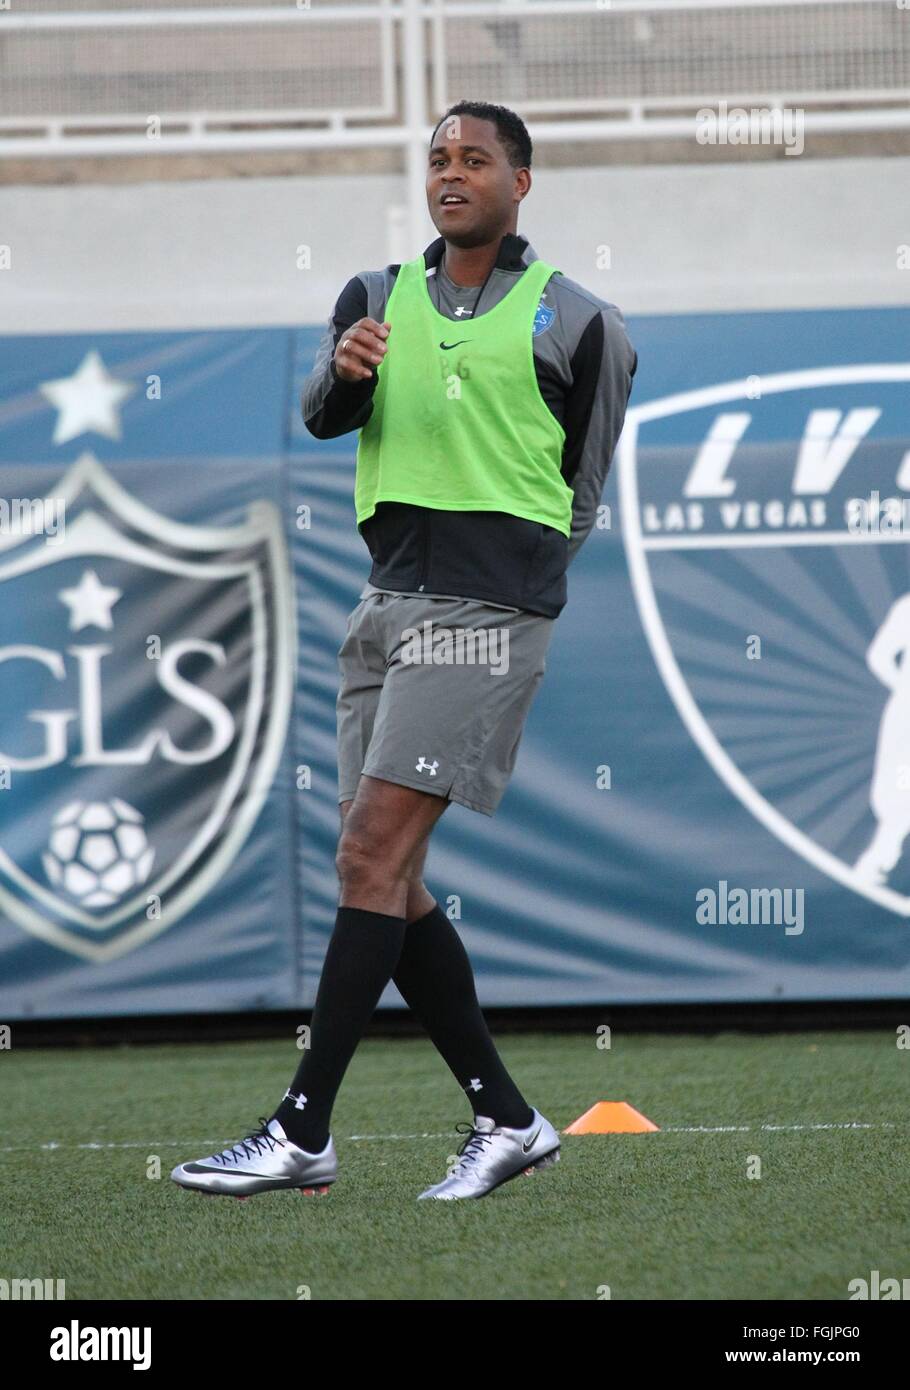 Las Vegas, NV, USA. 19th Feb, 2016. Patrick Kluivert in attendance for  Global Legends Series Soccer Weekend Training Sessions, Sam Boyd Stadium,  Las Vegas, NV February 19, 2016. Credit: James Atoa/Everett Collection/Alamy